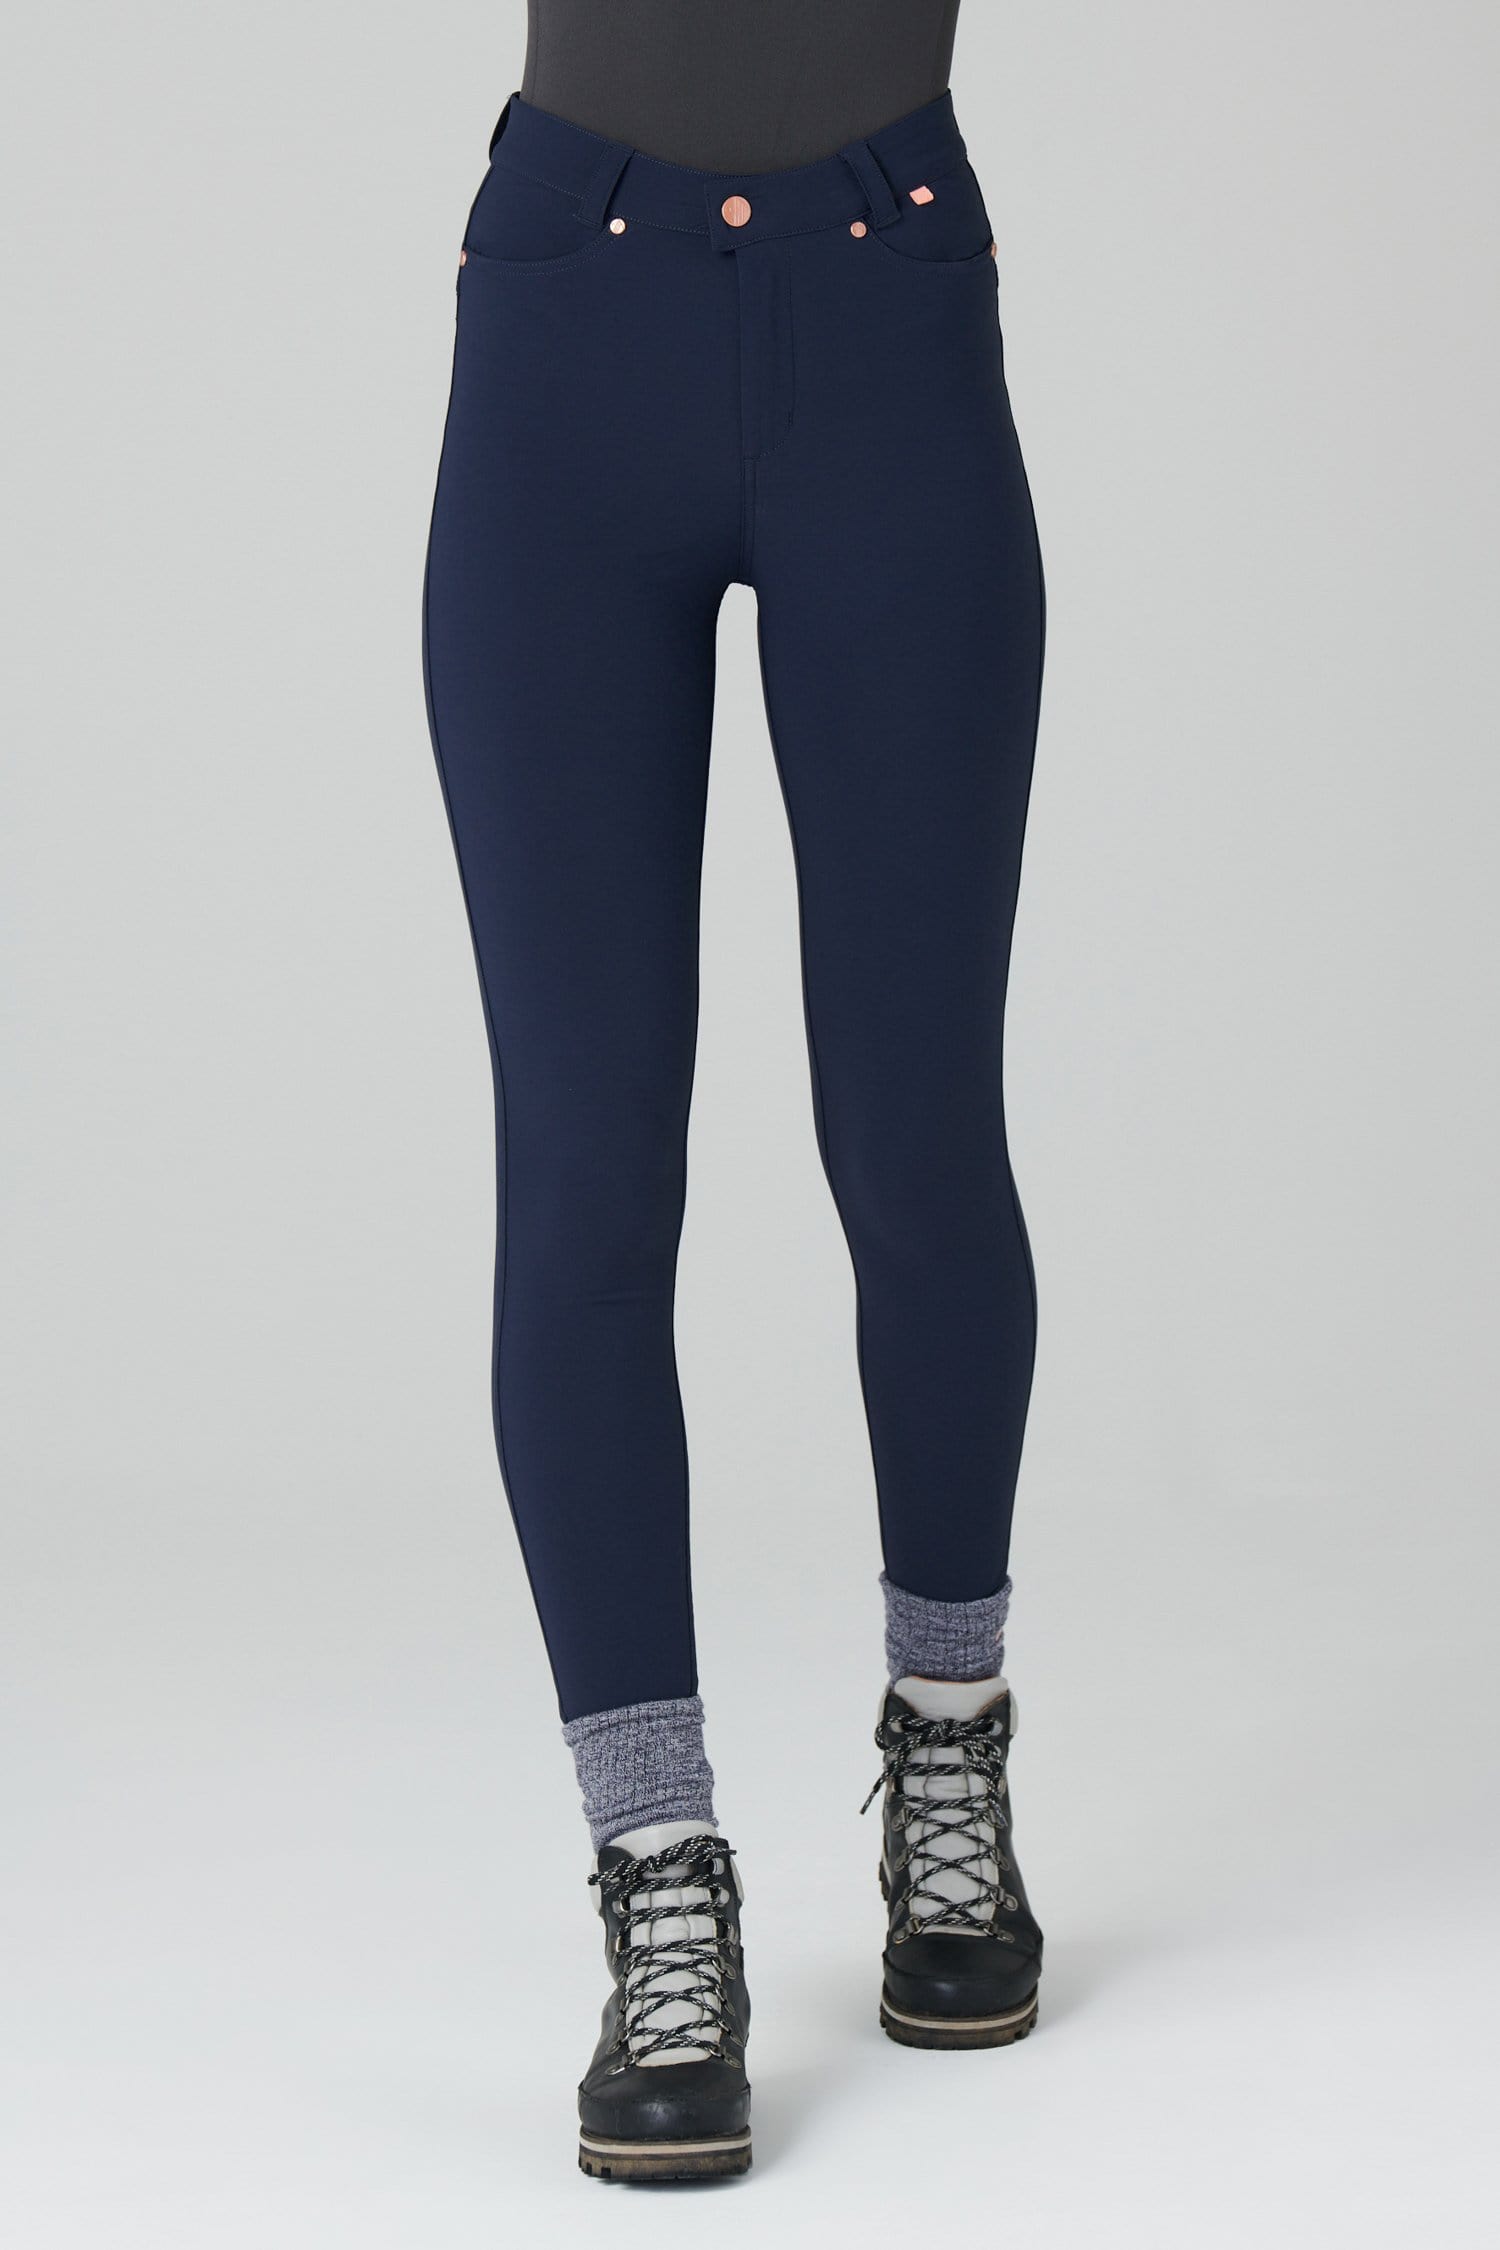 Max Stretch Skinny Outdoor Trousers - Deep Navy - 32l / Uk14 - Womens - Acai Outdoorwear